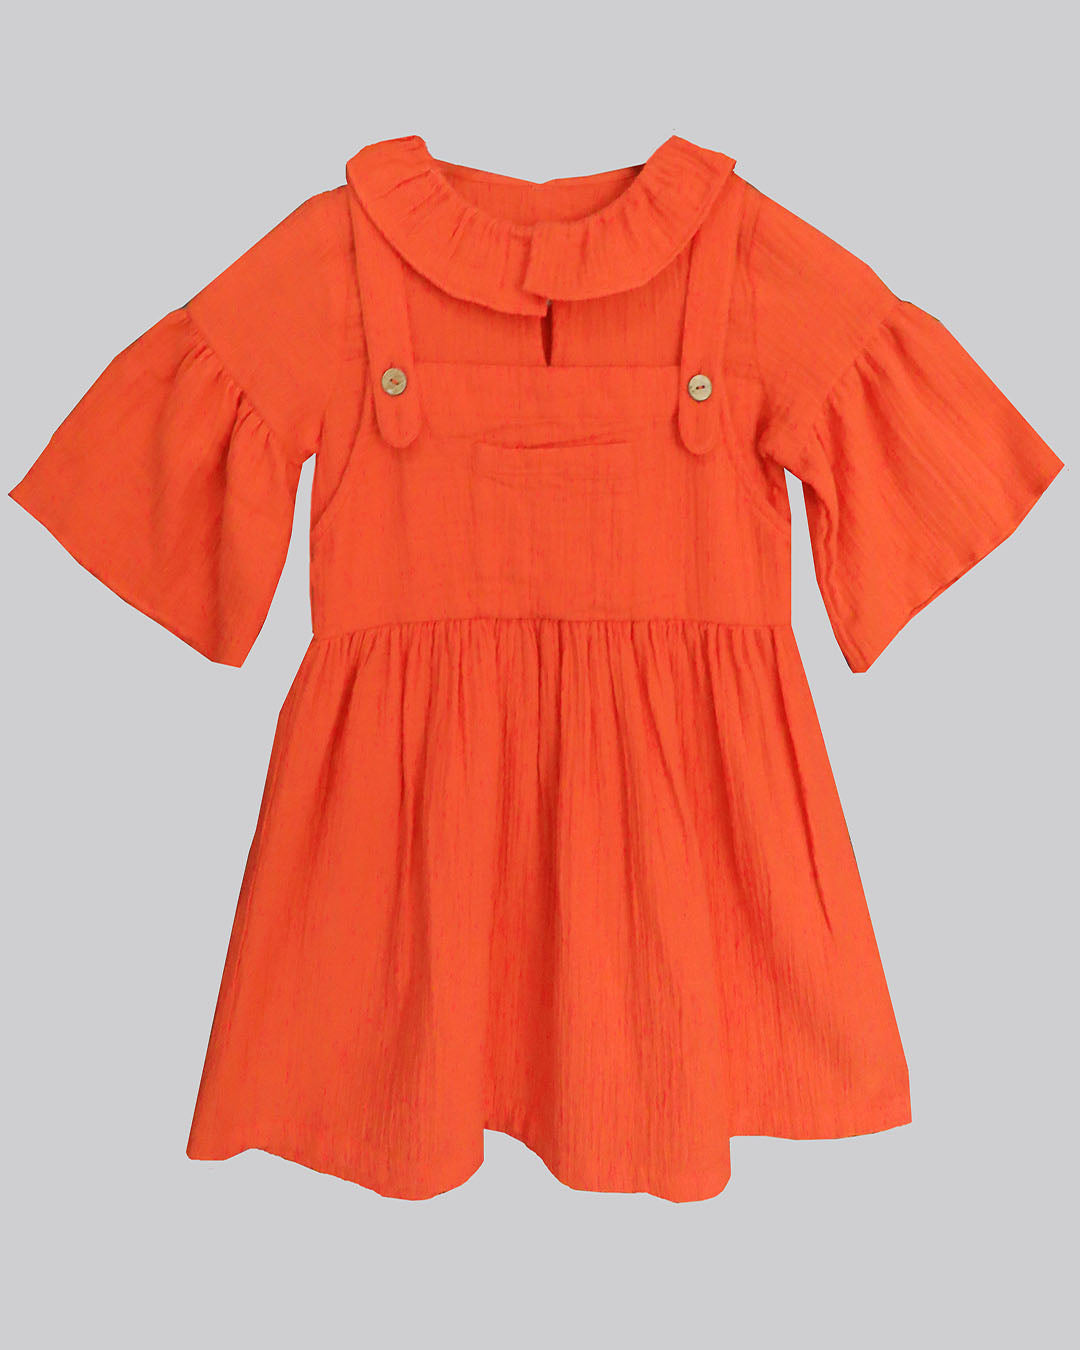 ORANGE DUANGREE STYLE DRESS IN SOFT COTTON DOUBLE WEAVE WITH OPEN CHEST POCKET AND BELL SLEEVES